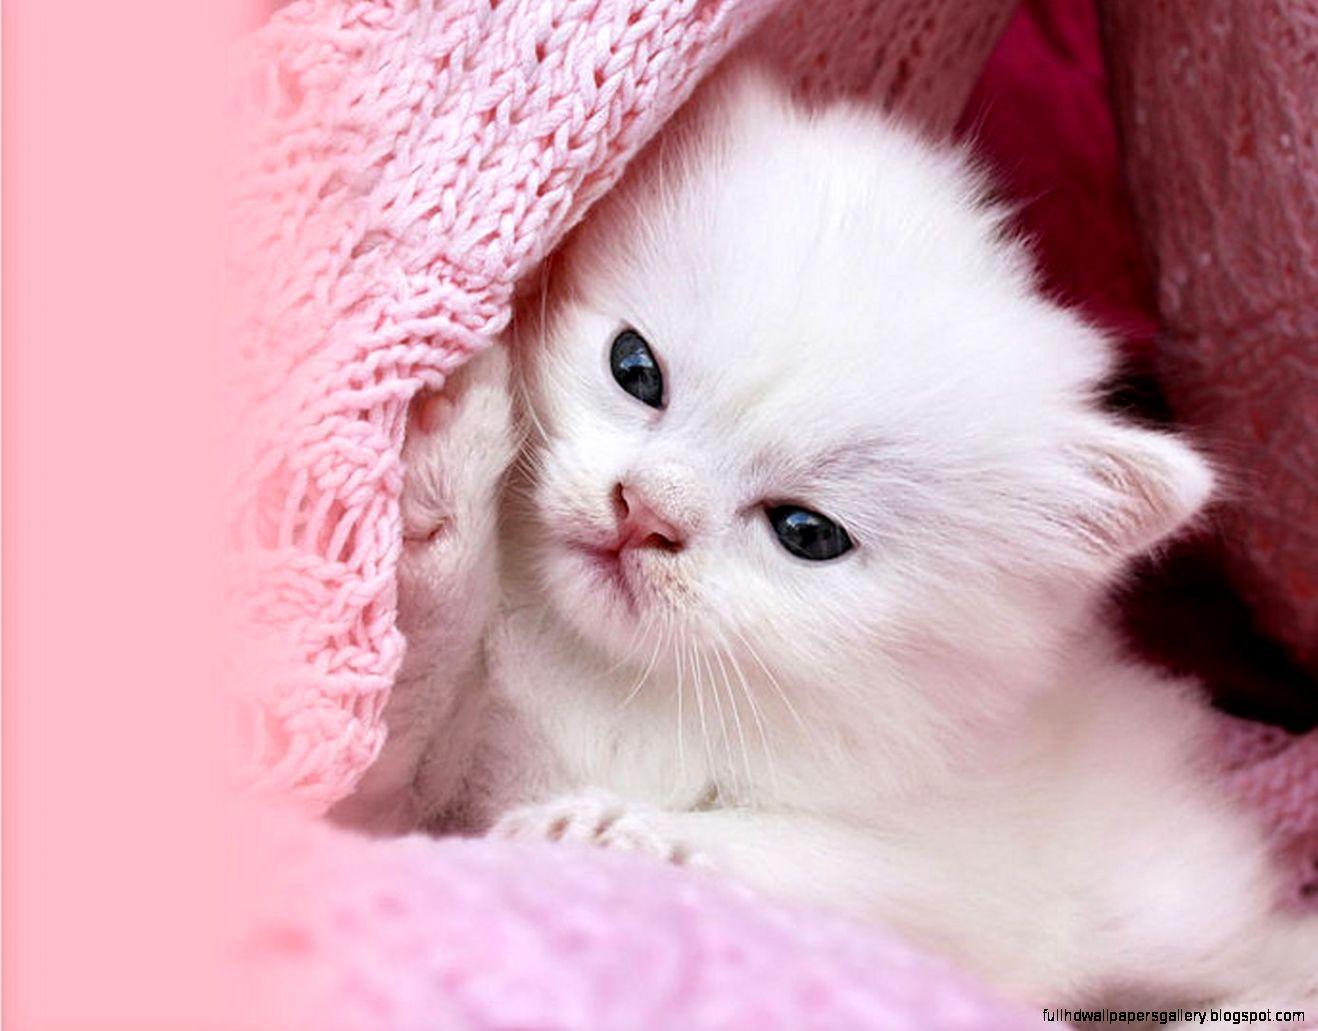 Cute White Cat Wallpaper On Pink Background, Kawaii Kitty Picture  Background Image And Wallpaper for Free Download